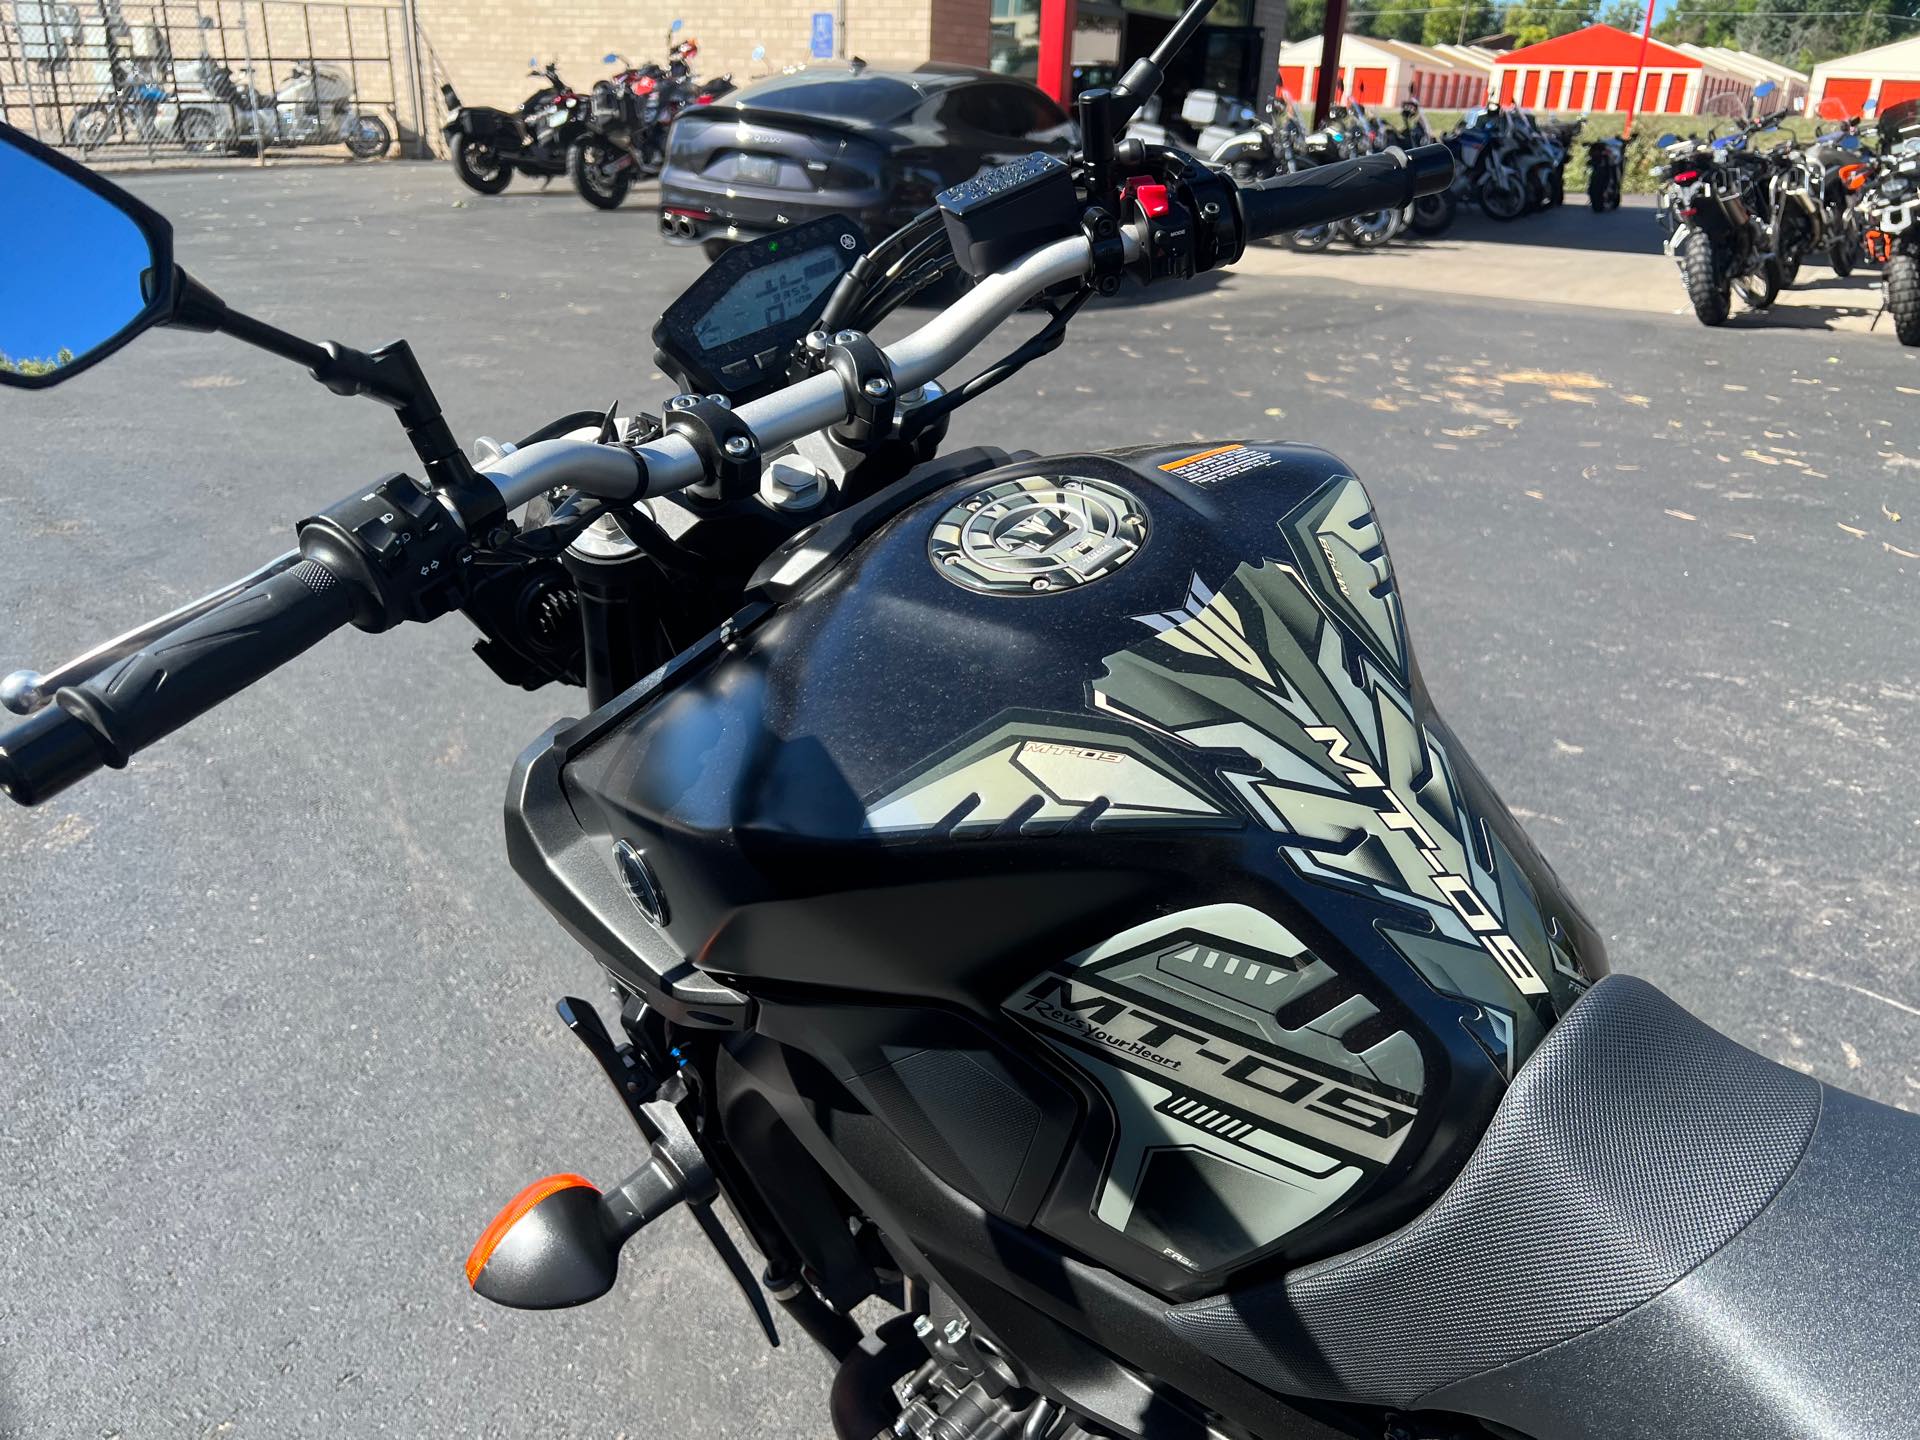 2020 Yamaha MT 09 at Aces Motorcycles - Fort Collins